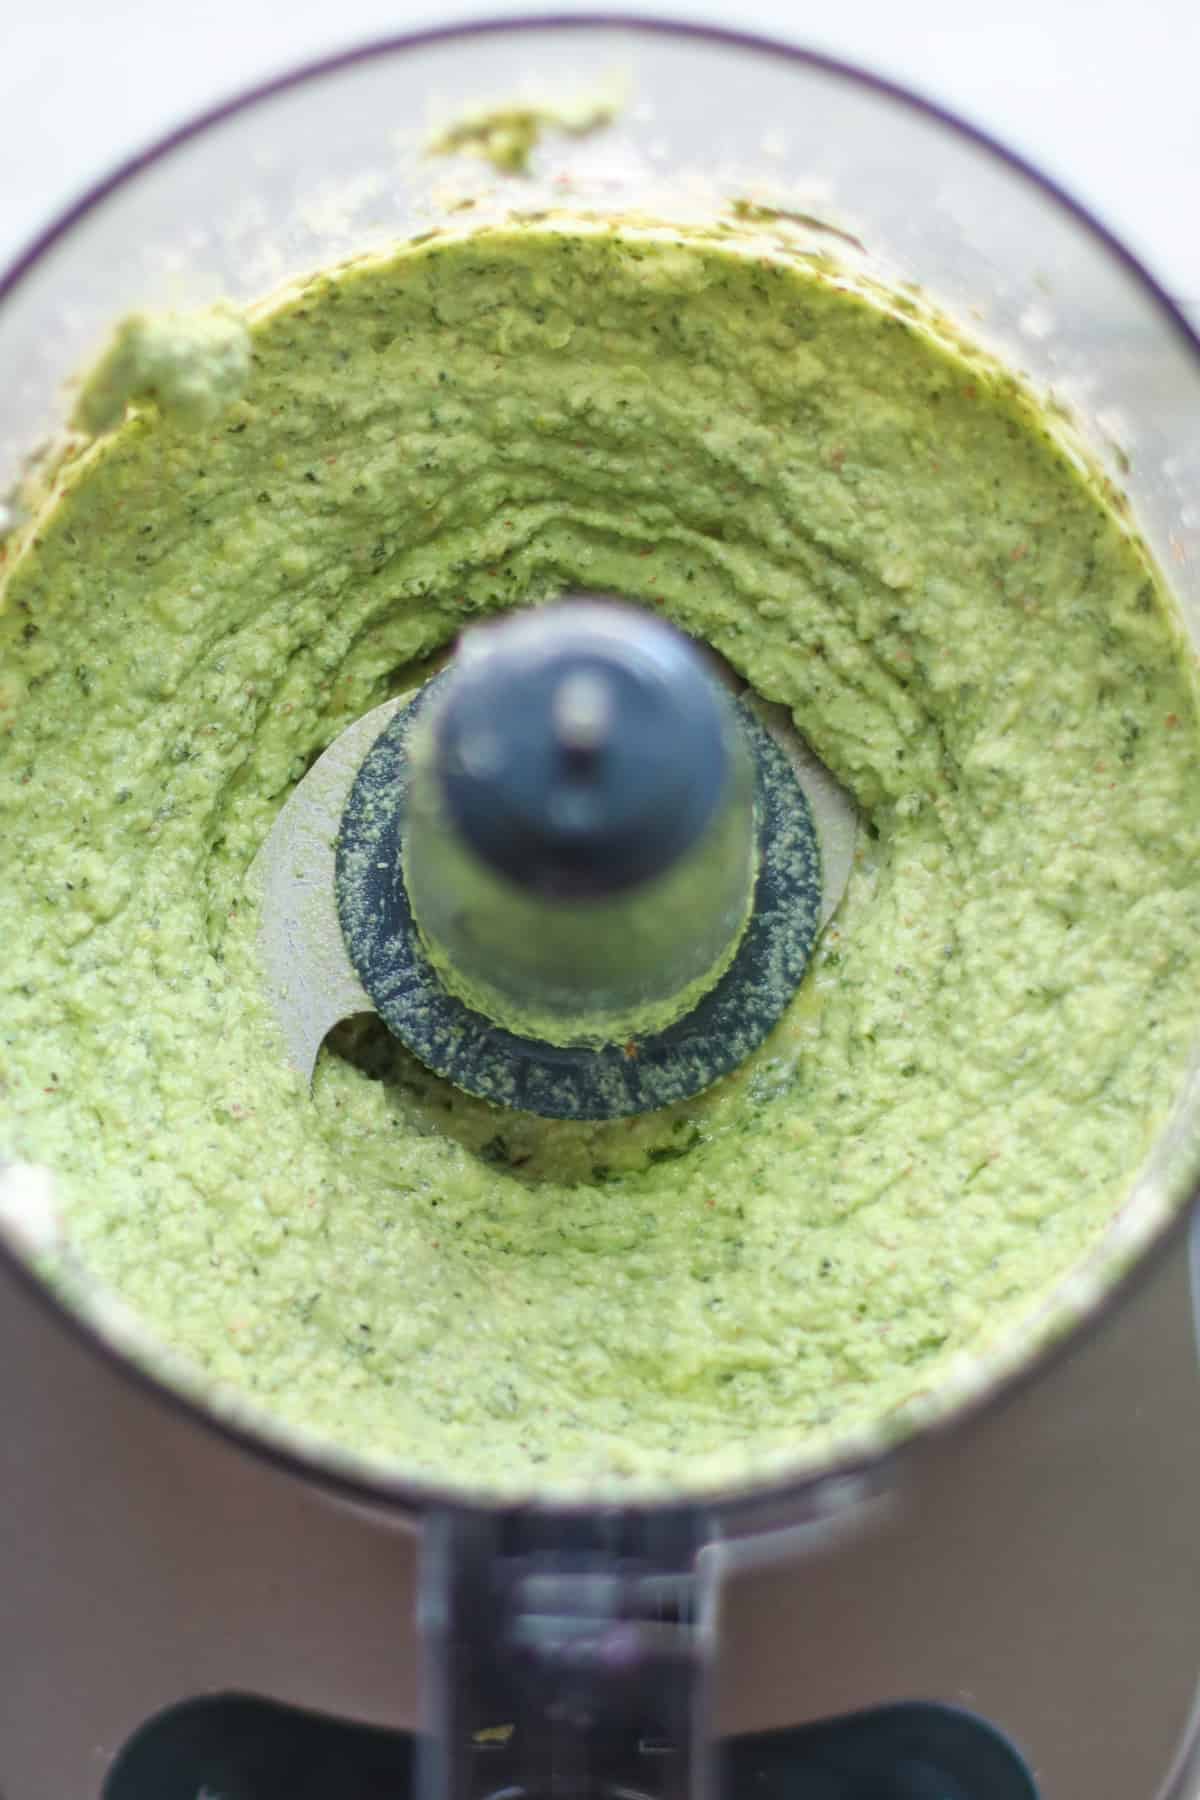 Blended ricotta pesto in a food processor.